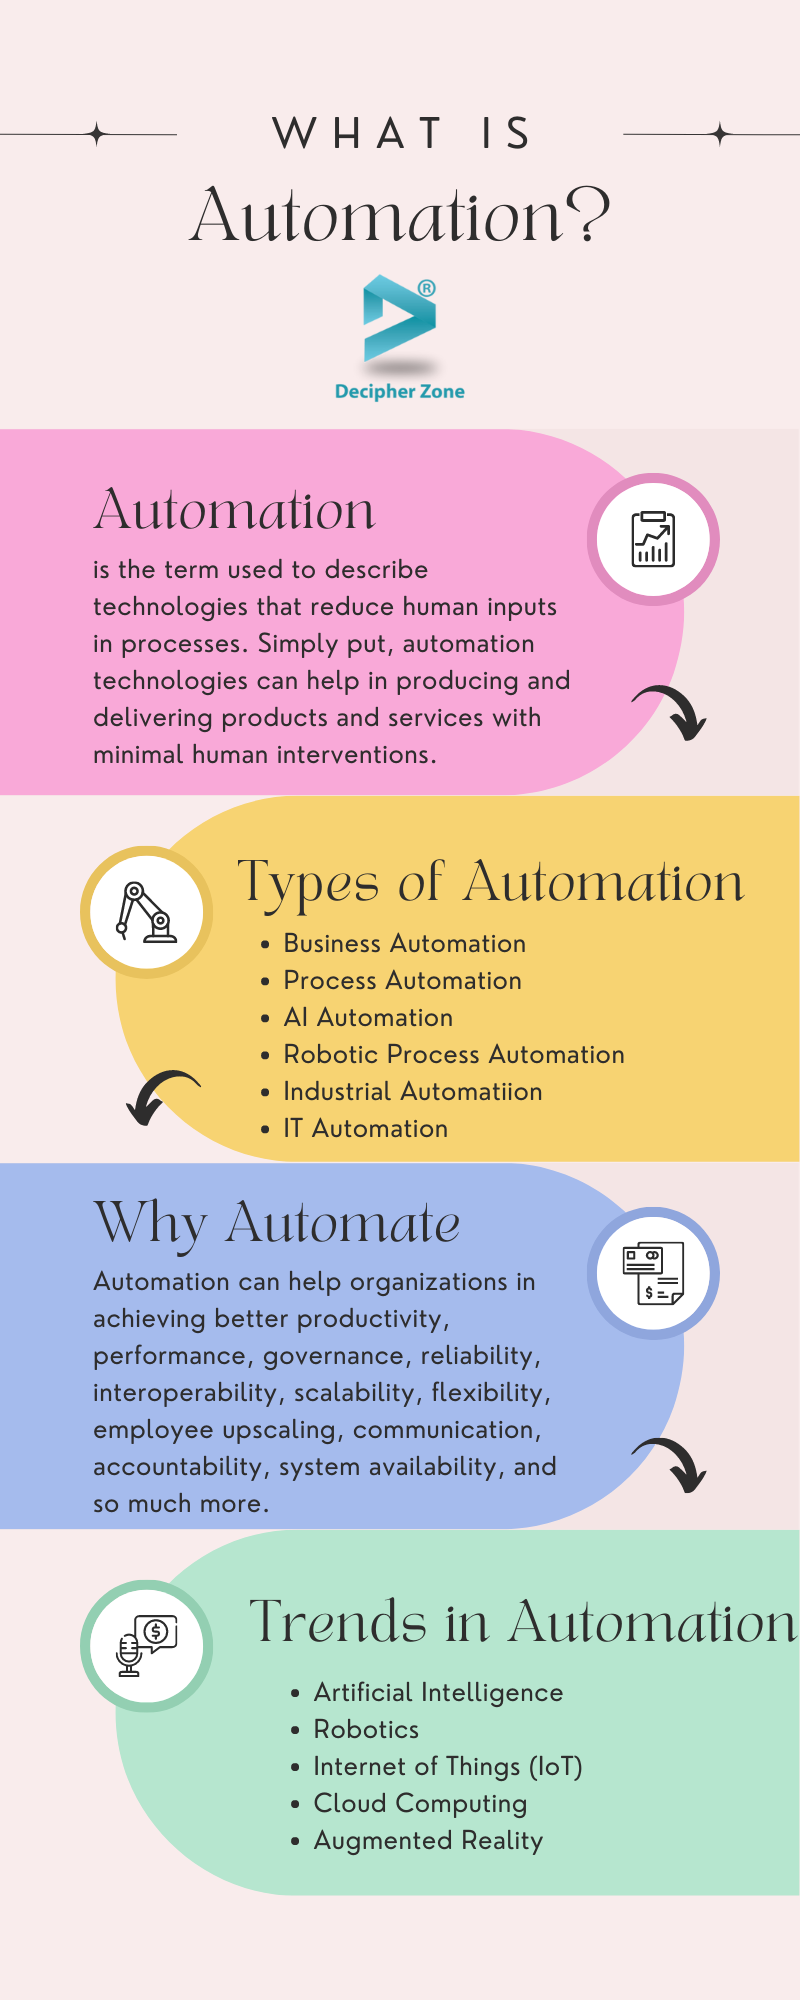 What is Automation